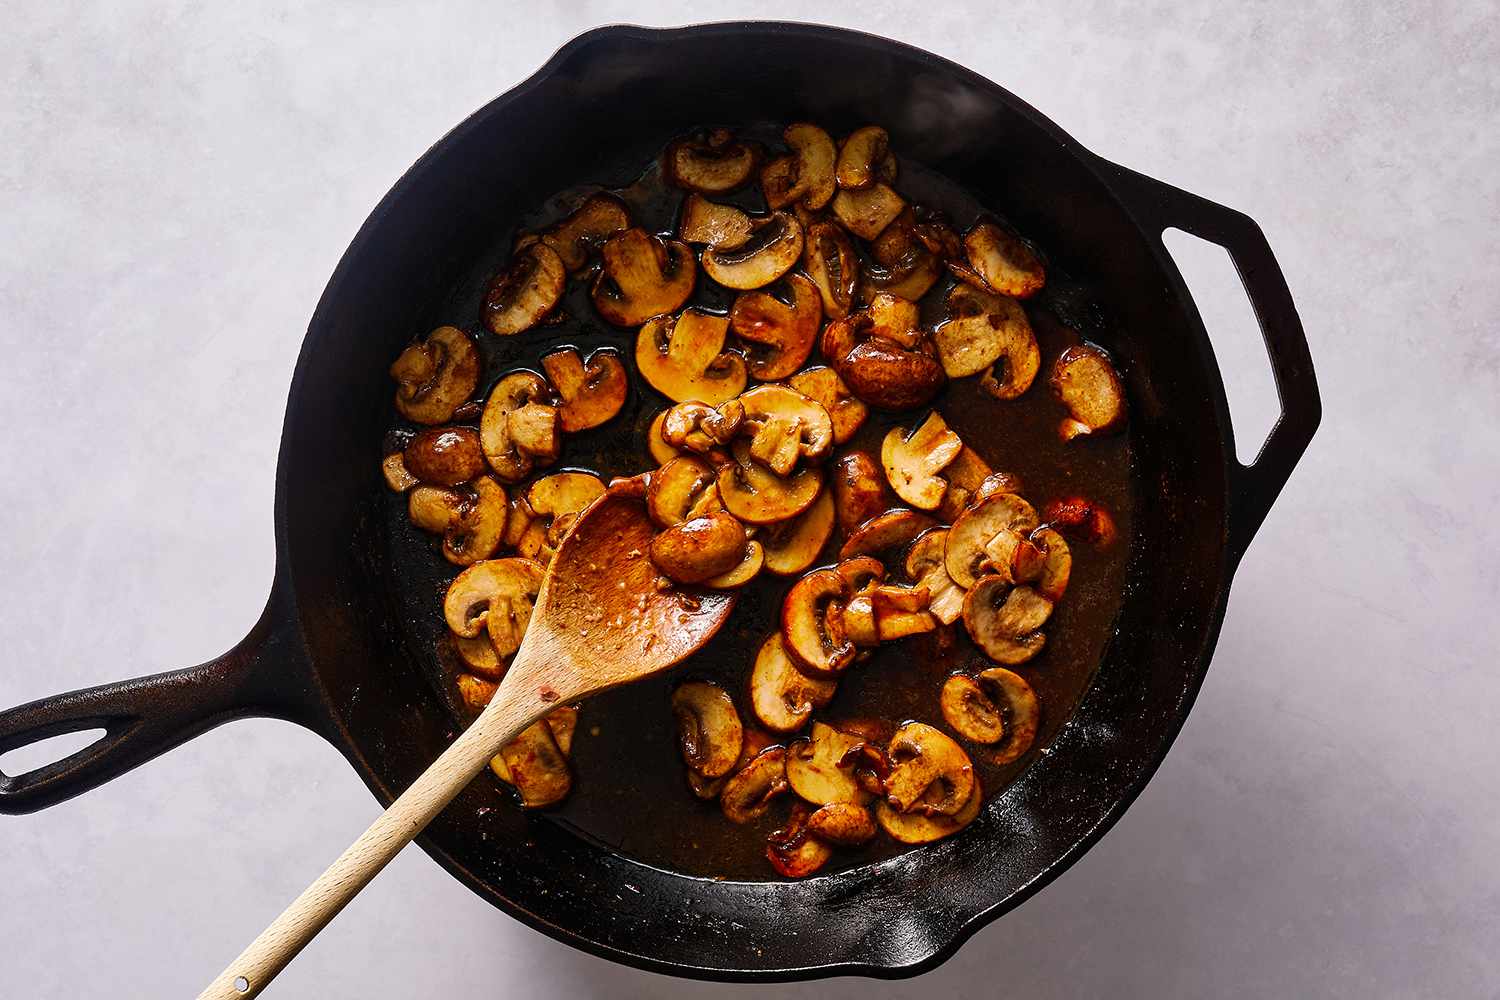 Mushrooms and sauce in a cast iron skillet, with a wooden spoon